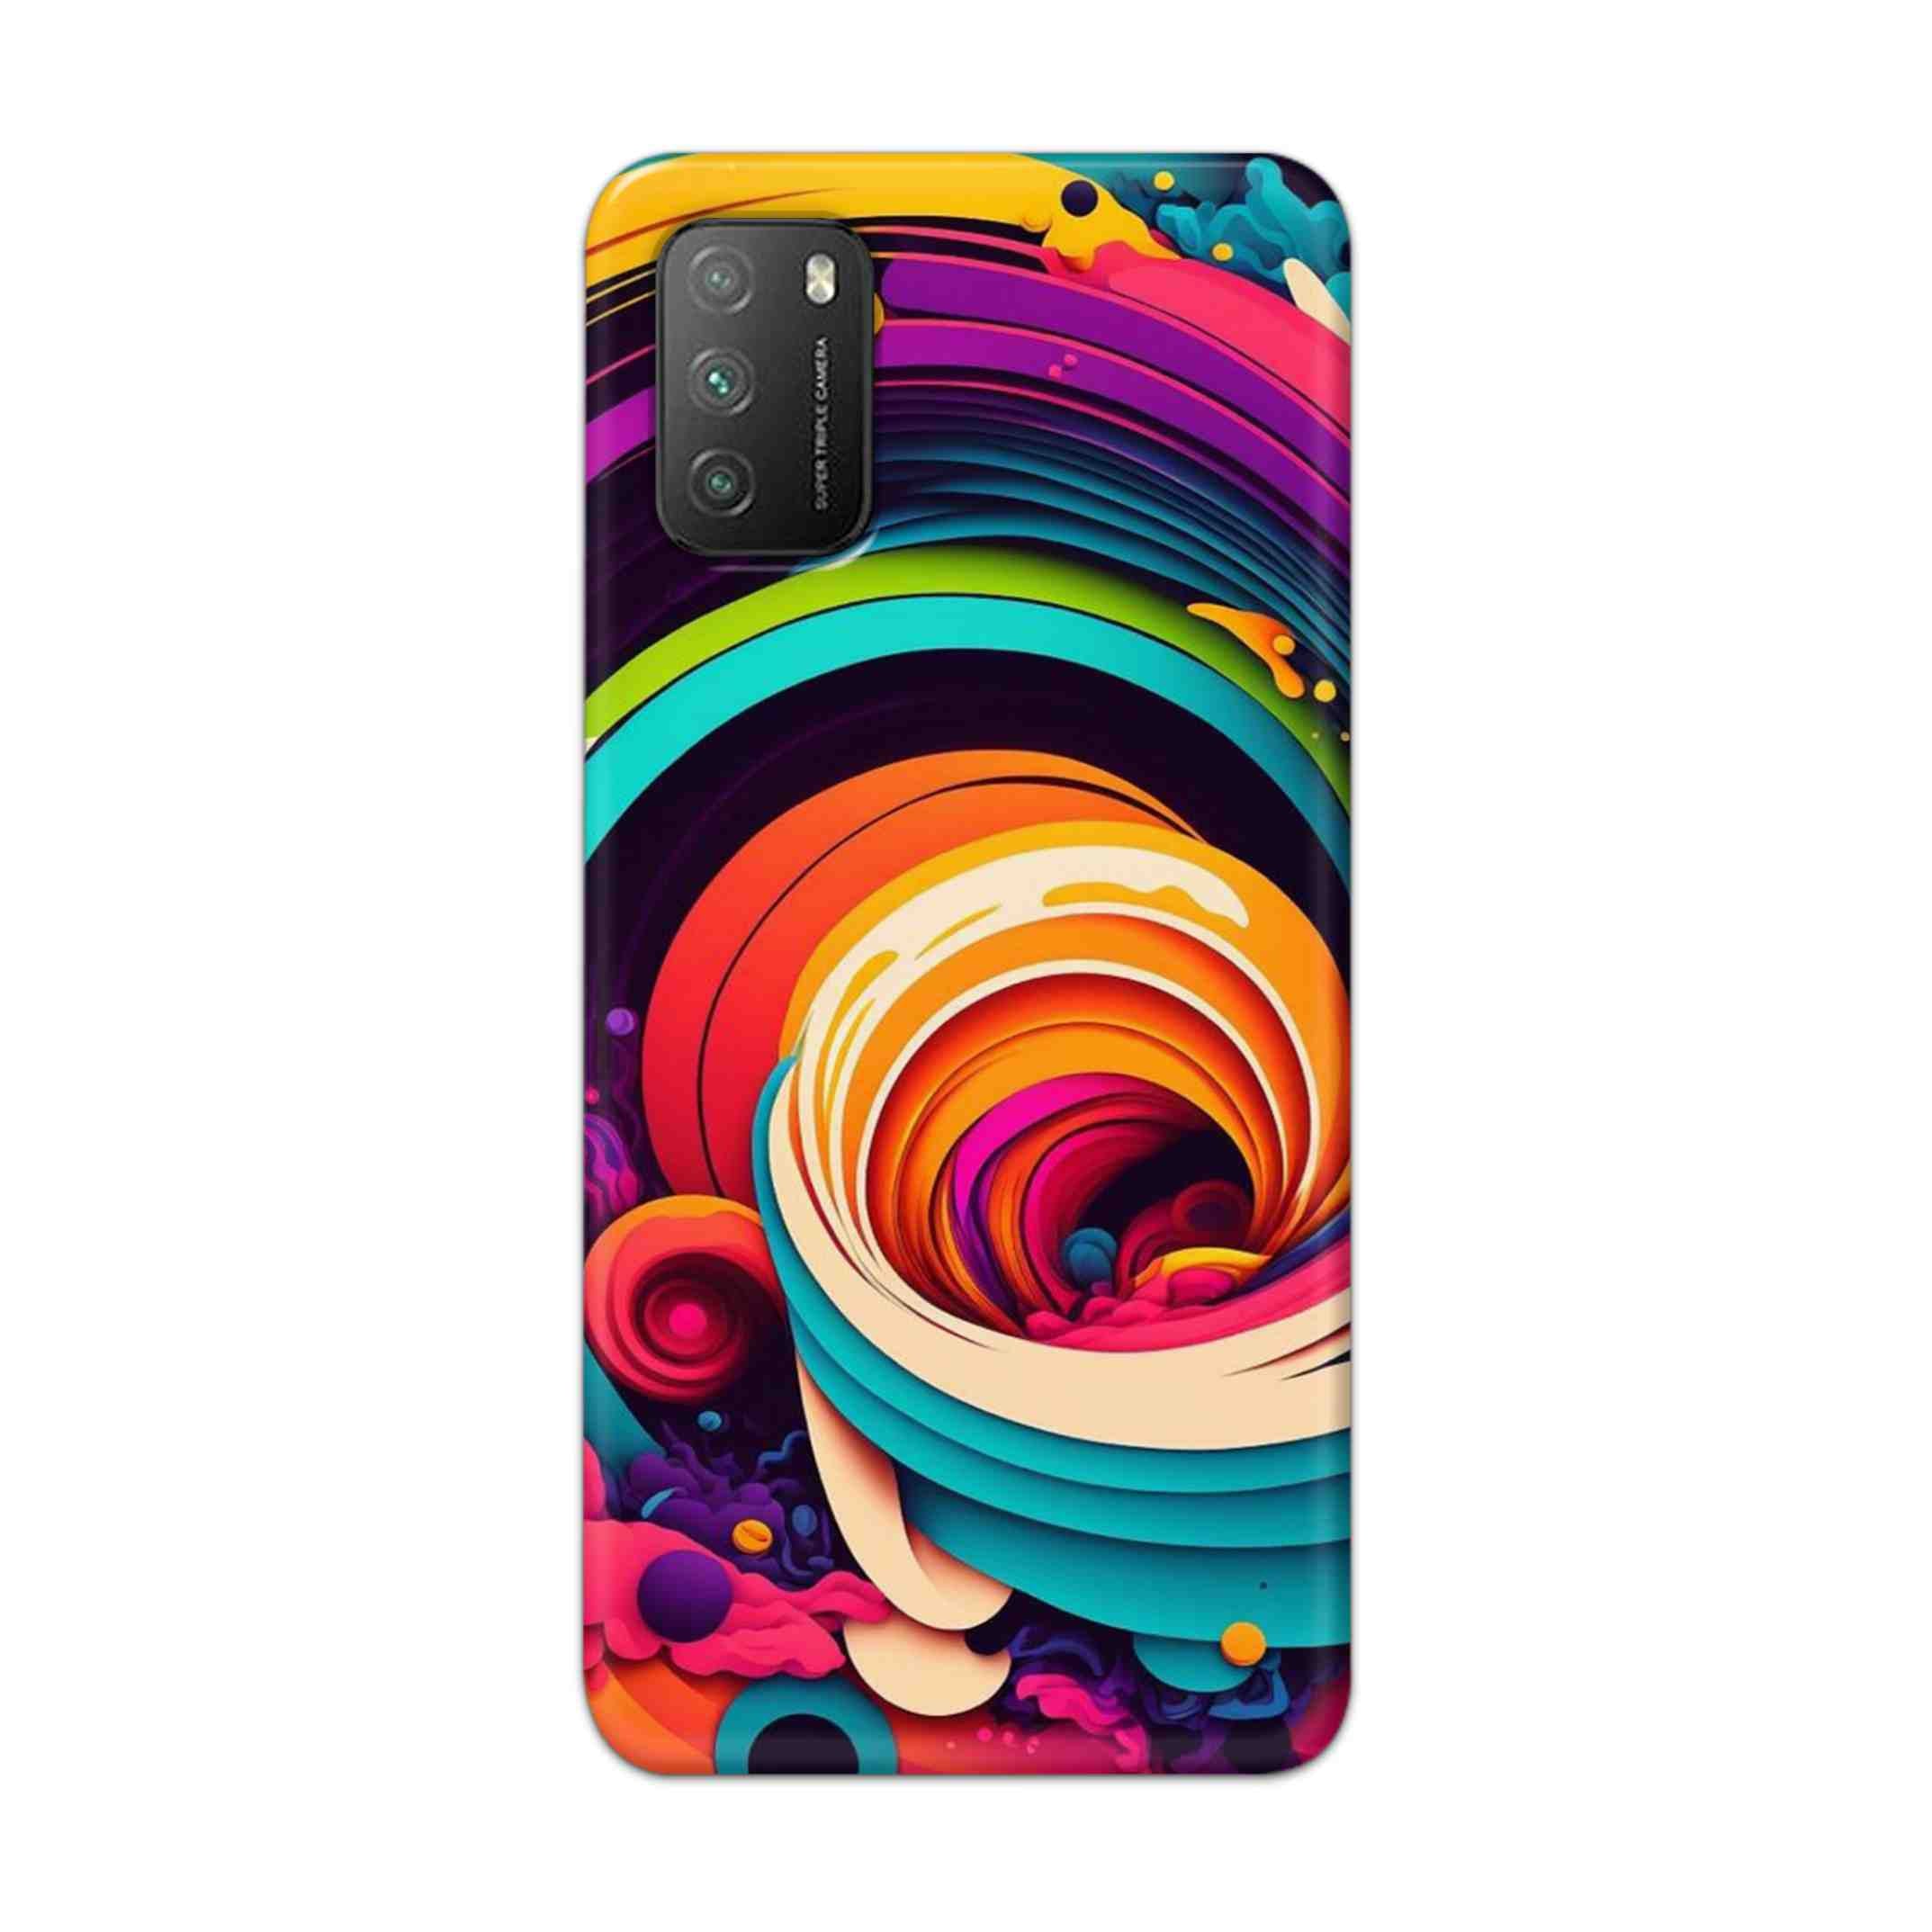 Buy Colour Circle Hard Back Mobile Phone Case Cover For Poco M3 Online